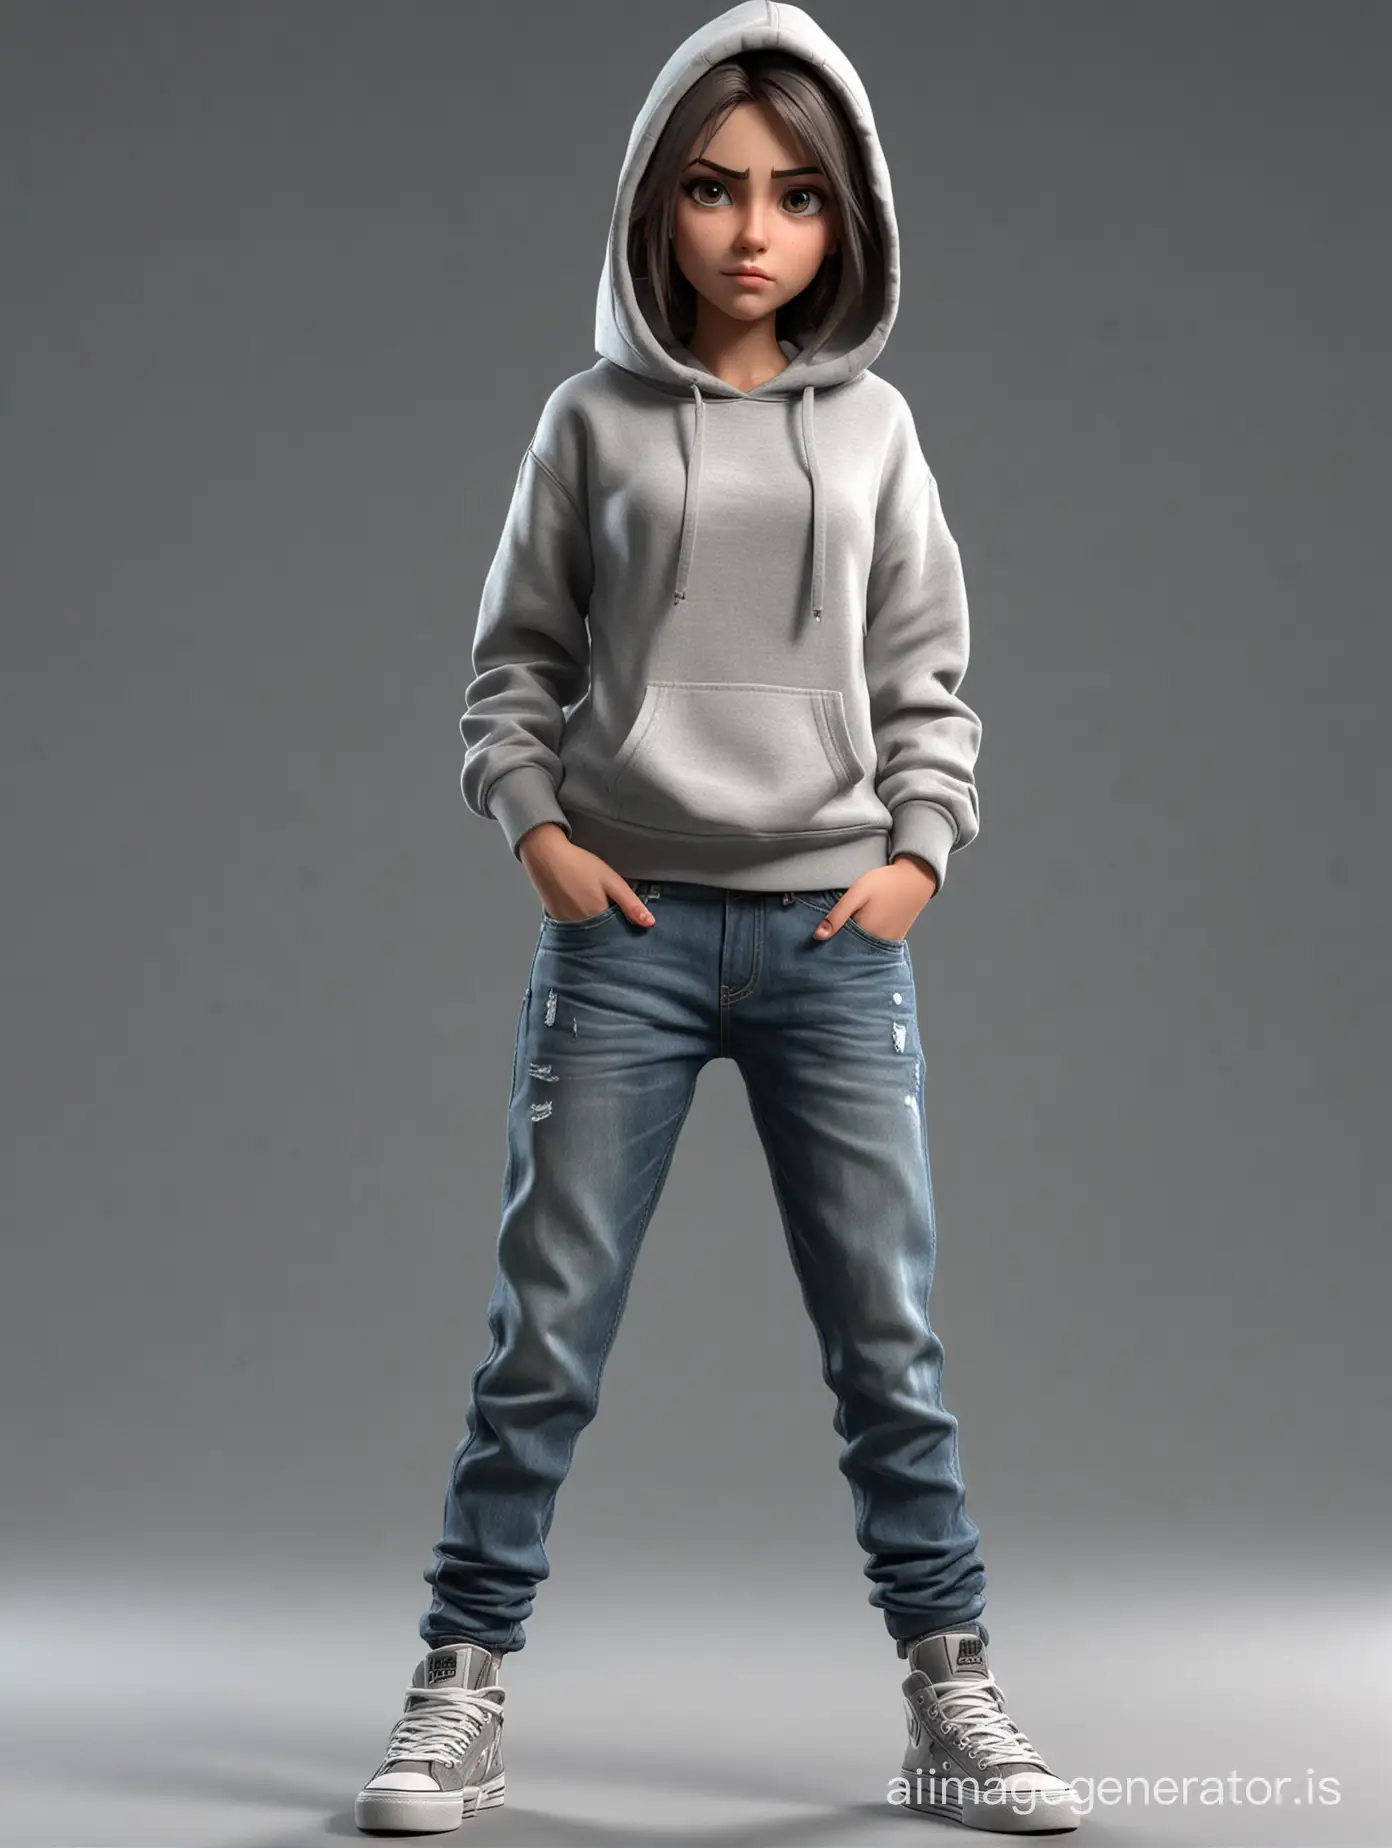 Sad girl in cartoon style in full height, an evil angry arrogant face, hands in the pockets of jeans, full-length, Wearing a grey hoodie, jeans, sneakers, full-body shot, long legs, model pose,  full growth, maximum detail, best quality, HD, gorgeous light and shadow, detailed design, 3D quality